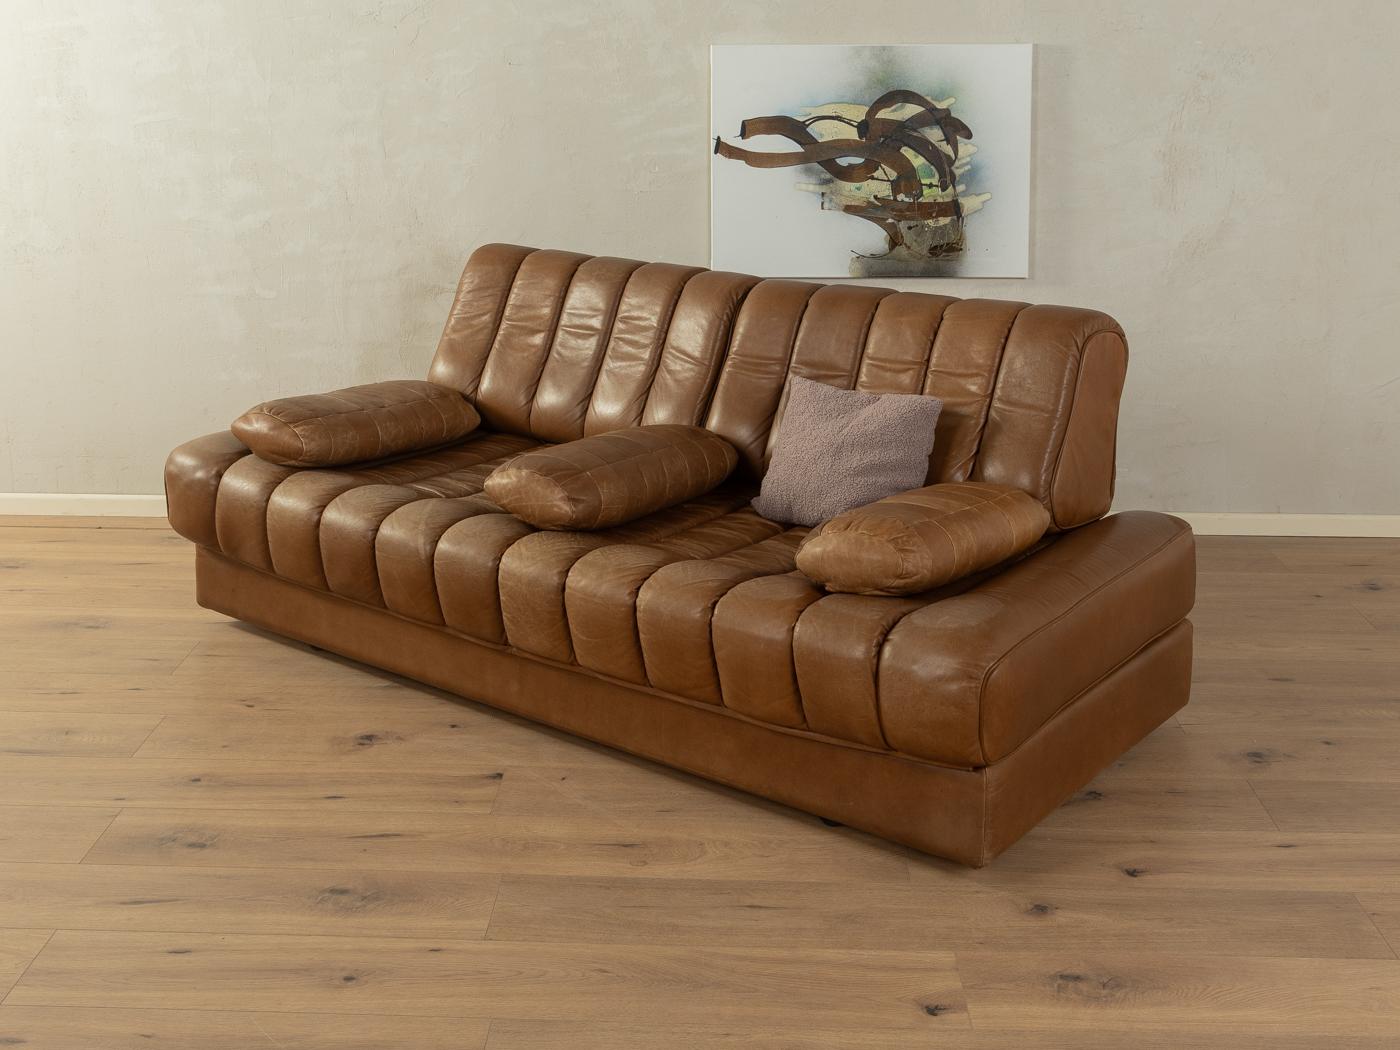 
Article Details
Rare convertible sofa bed from the 1970s. Model DS-85 by de Sede with the striking original cover made of brown buffalo leather with a wonderful patina. The sofa can be turned into a double bed by simply folding down the